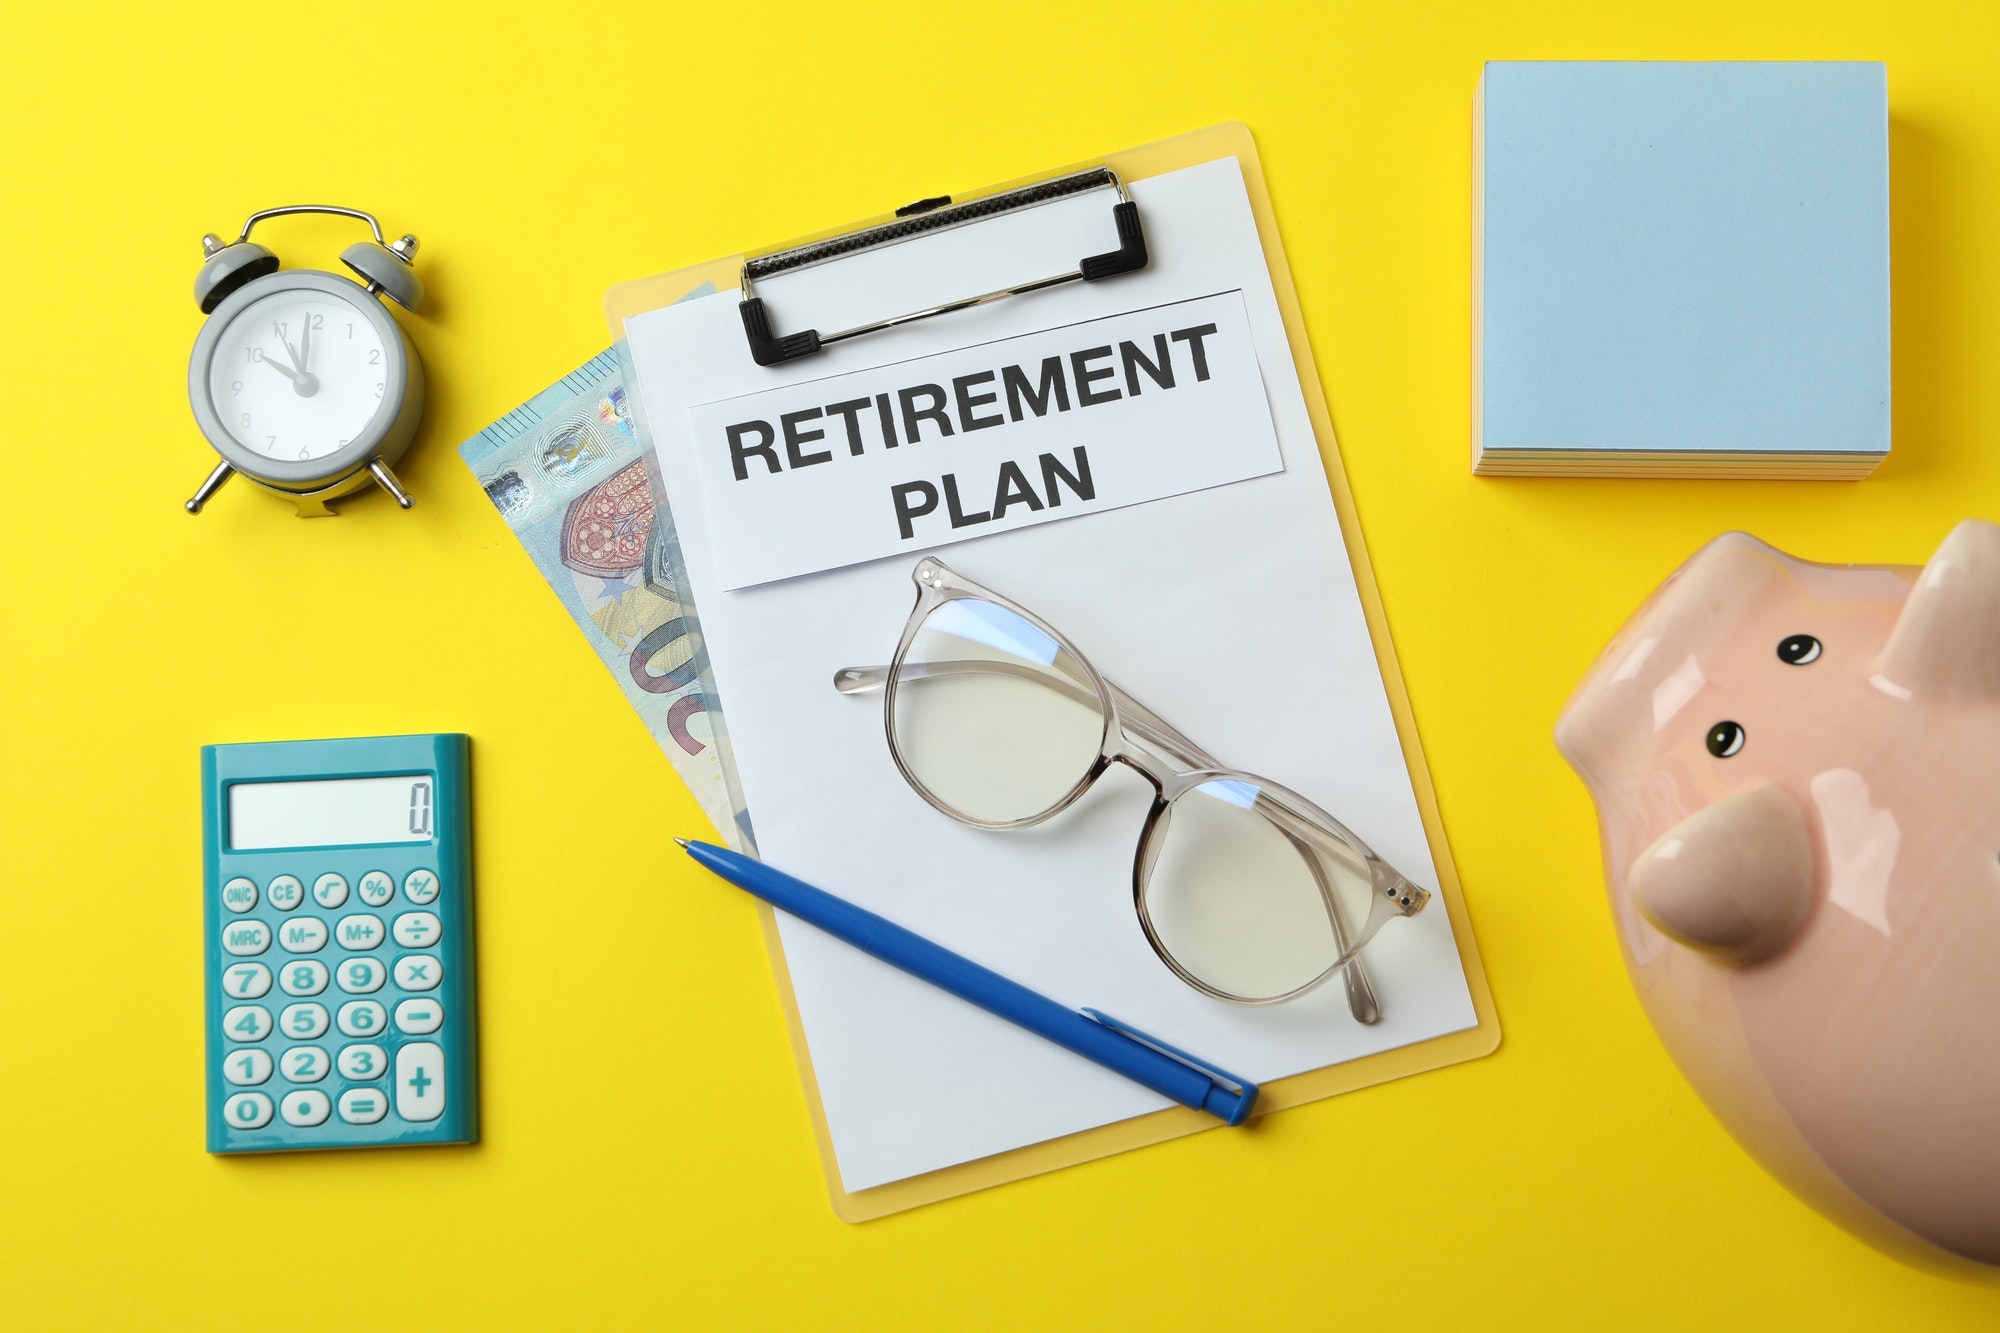 Concept of pension or retirement plan on yellow background